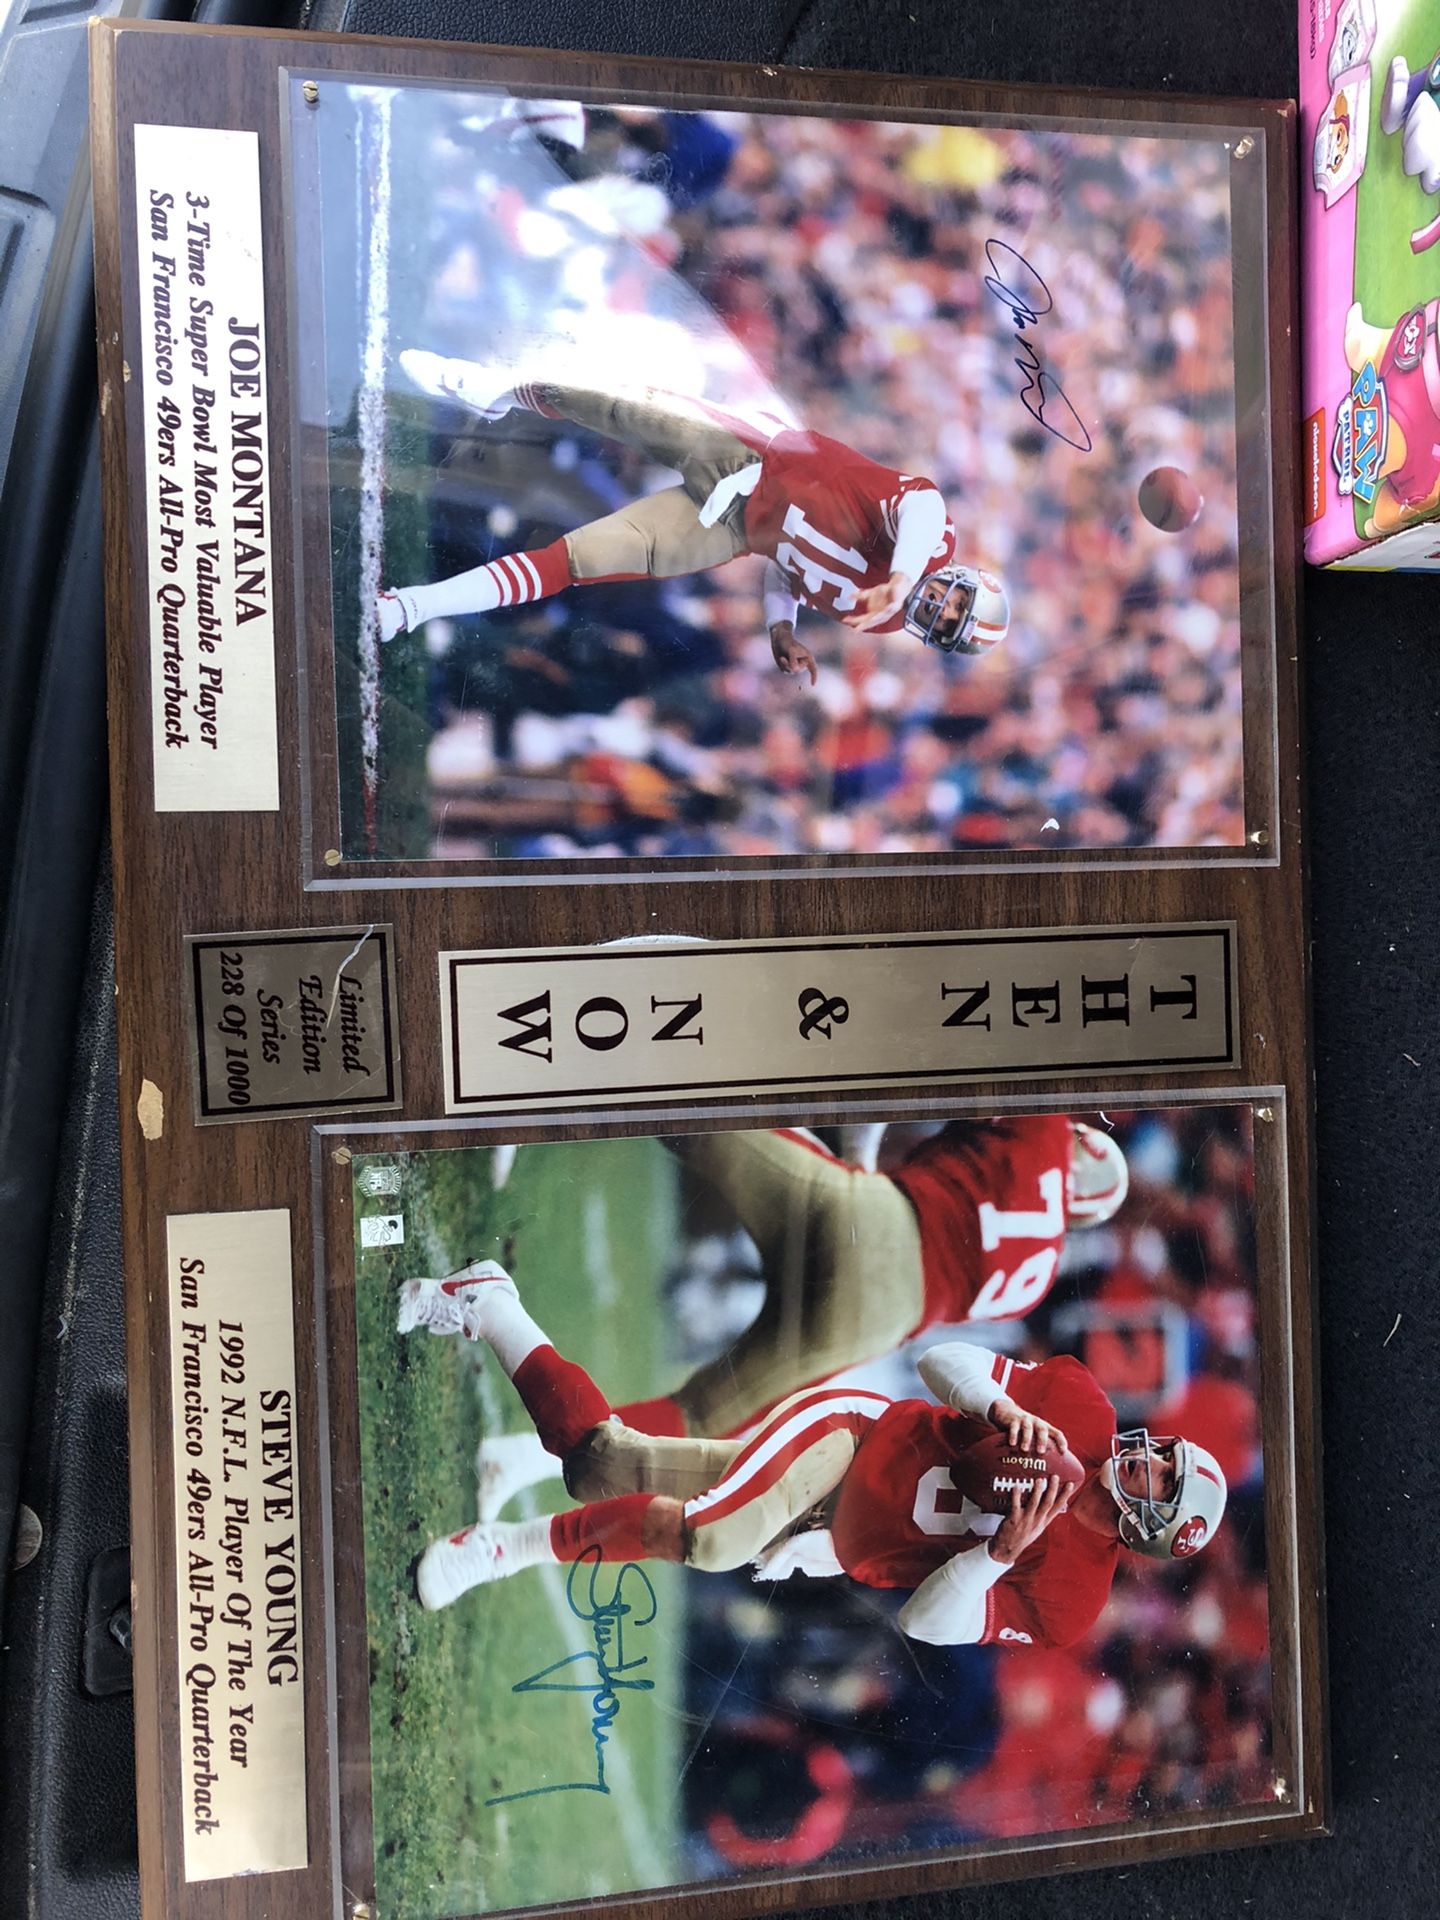 Signed Joe Montana and Steve Young plaque.